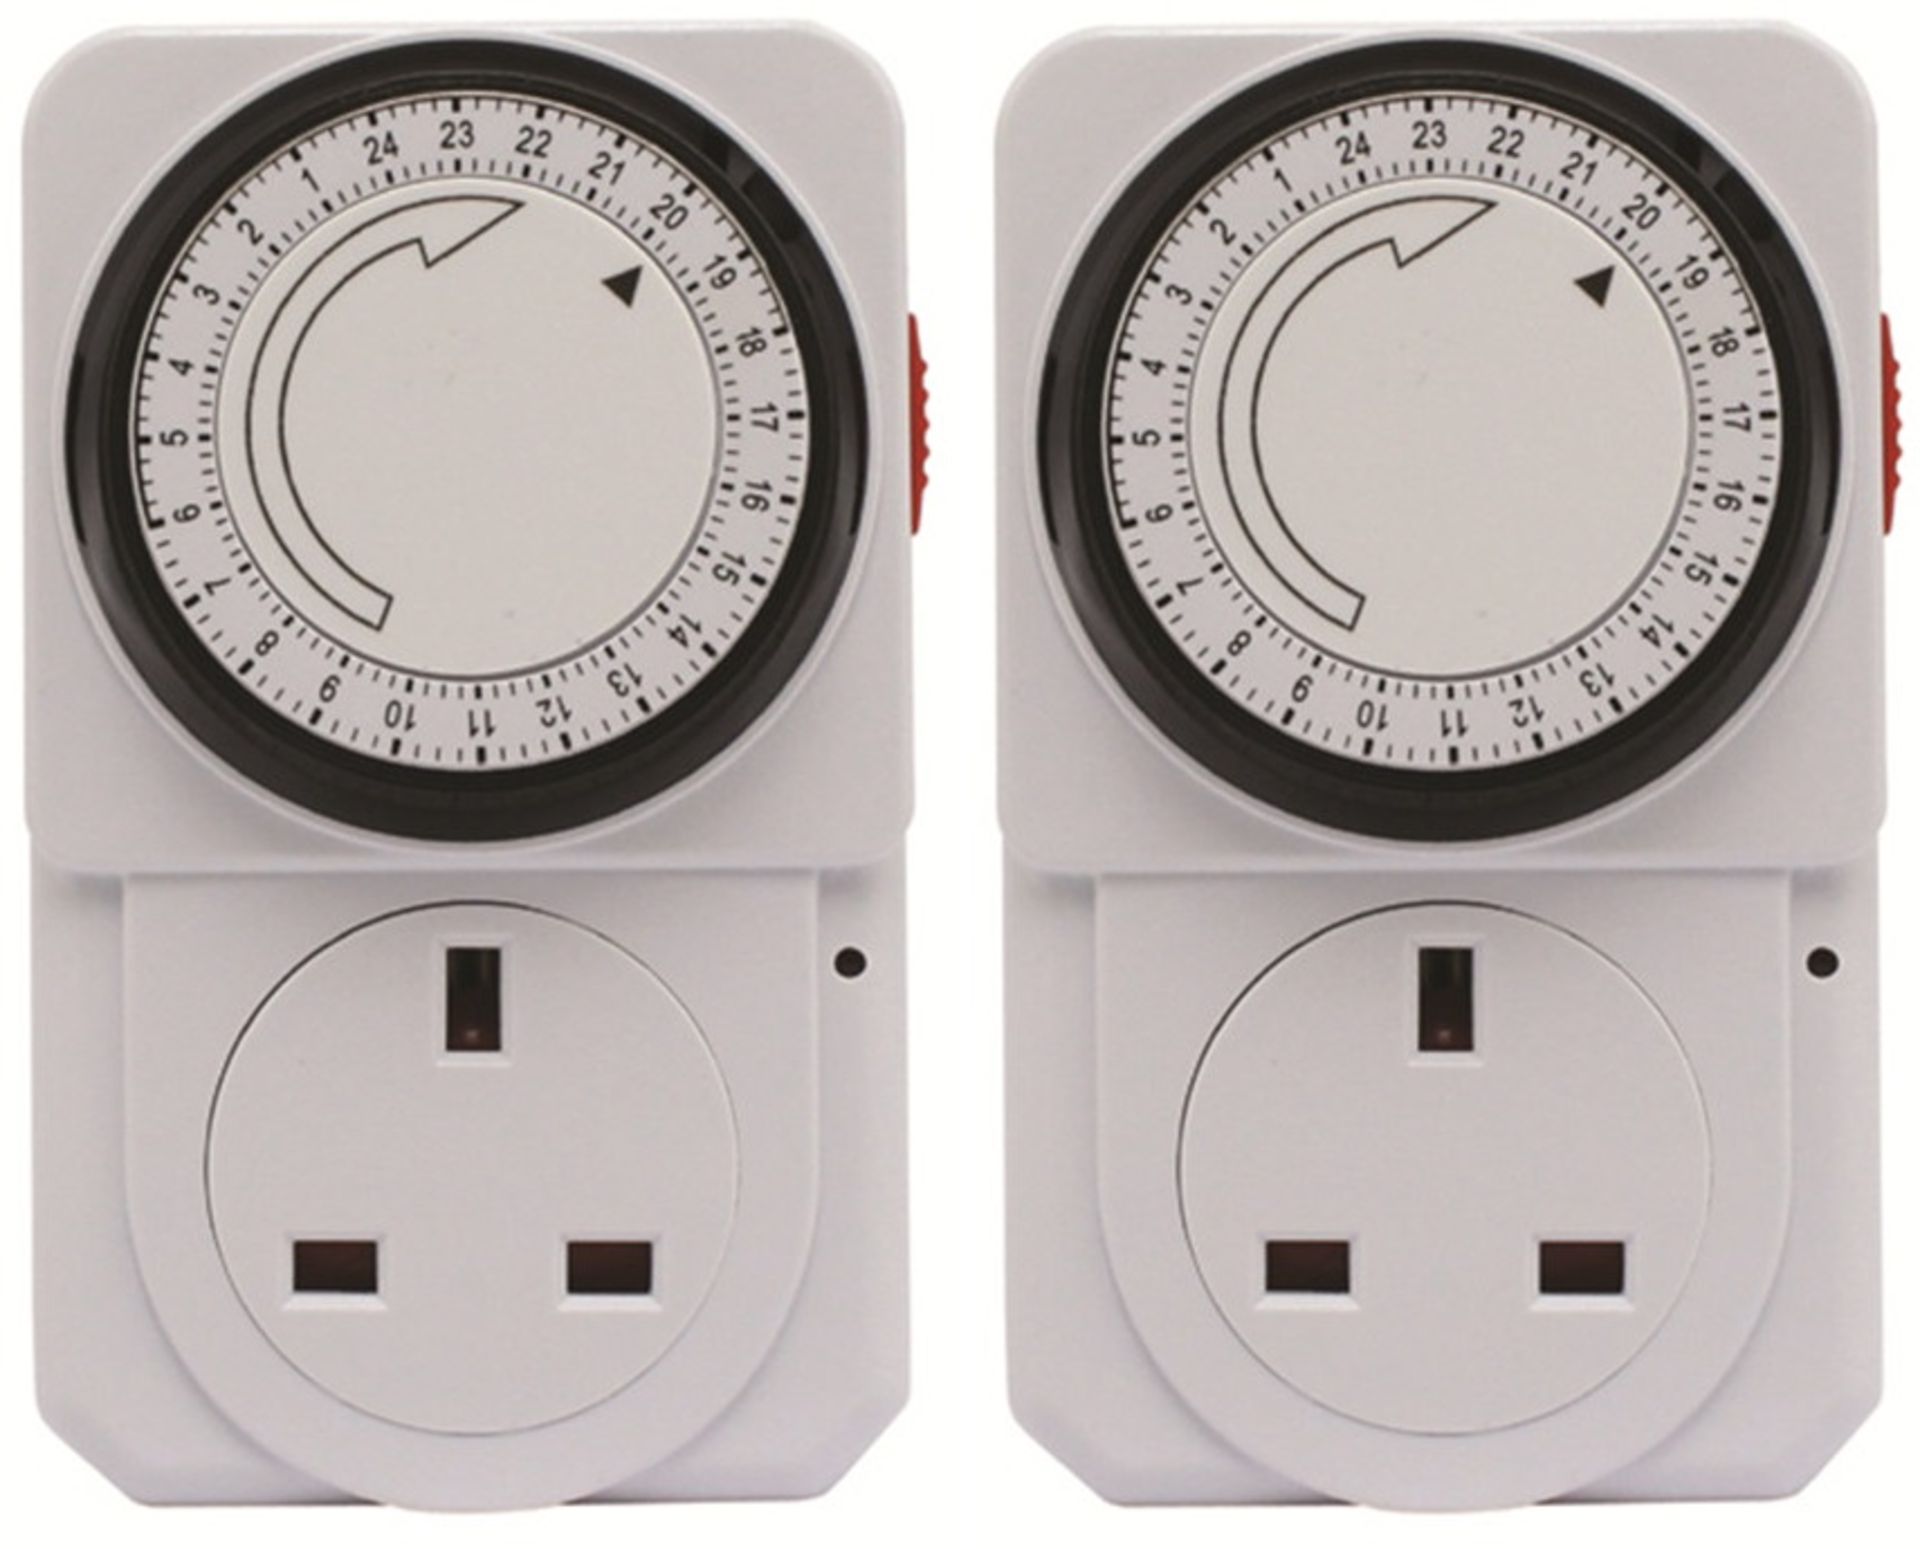 V Brand New Twin Pack Indoor Mechanical Timer Sockets With 24 Hour Timer - 48 Switches Per Day